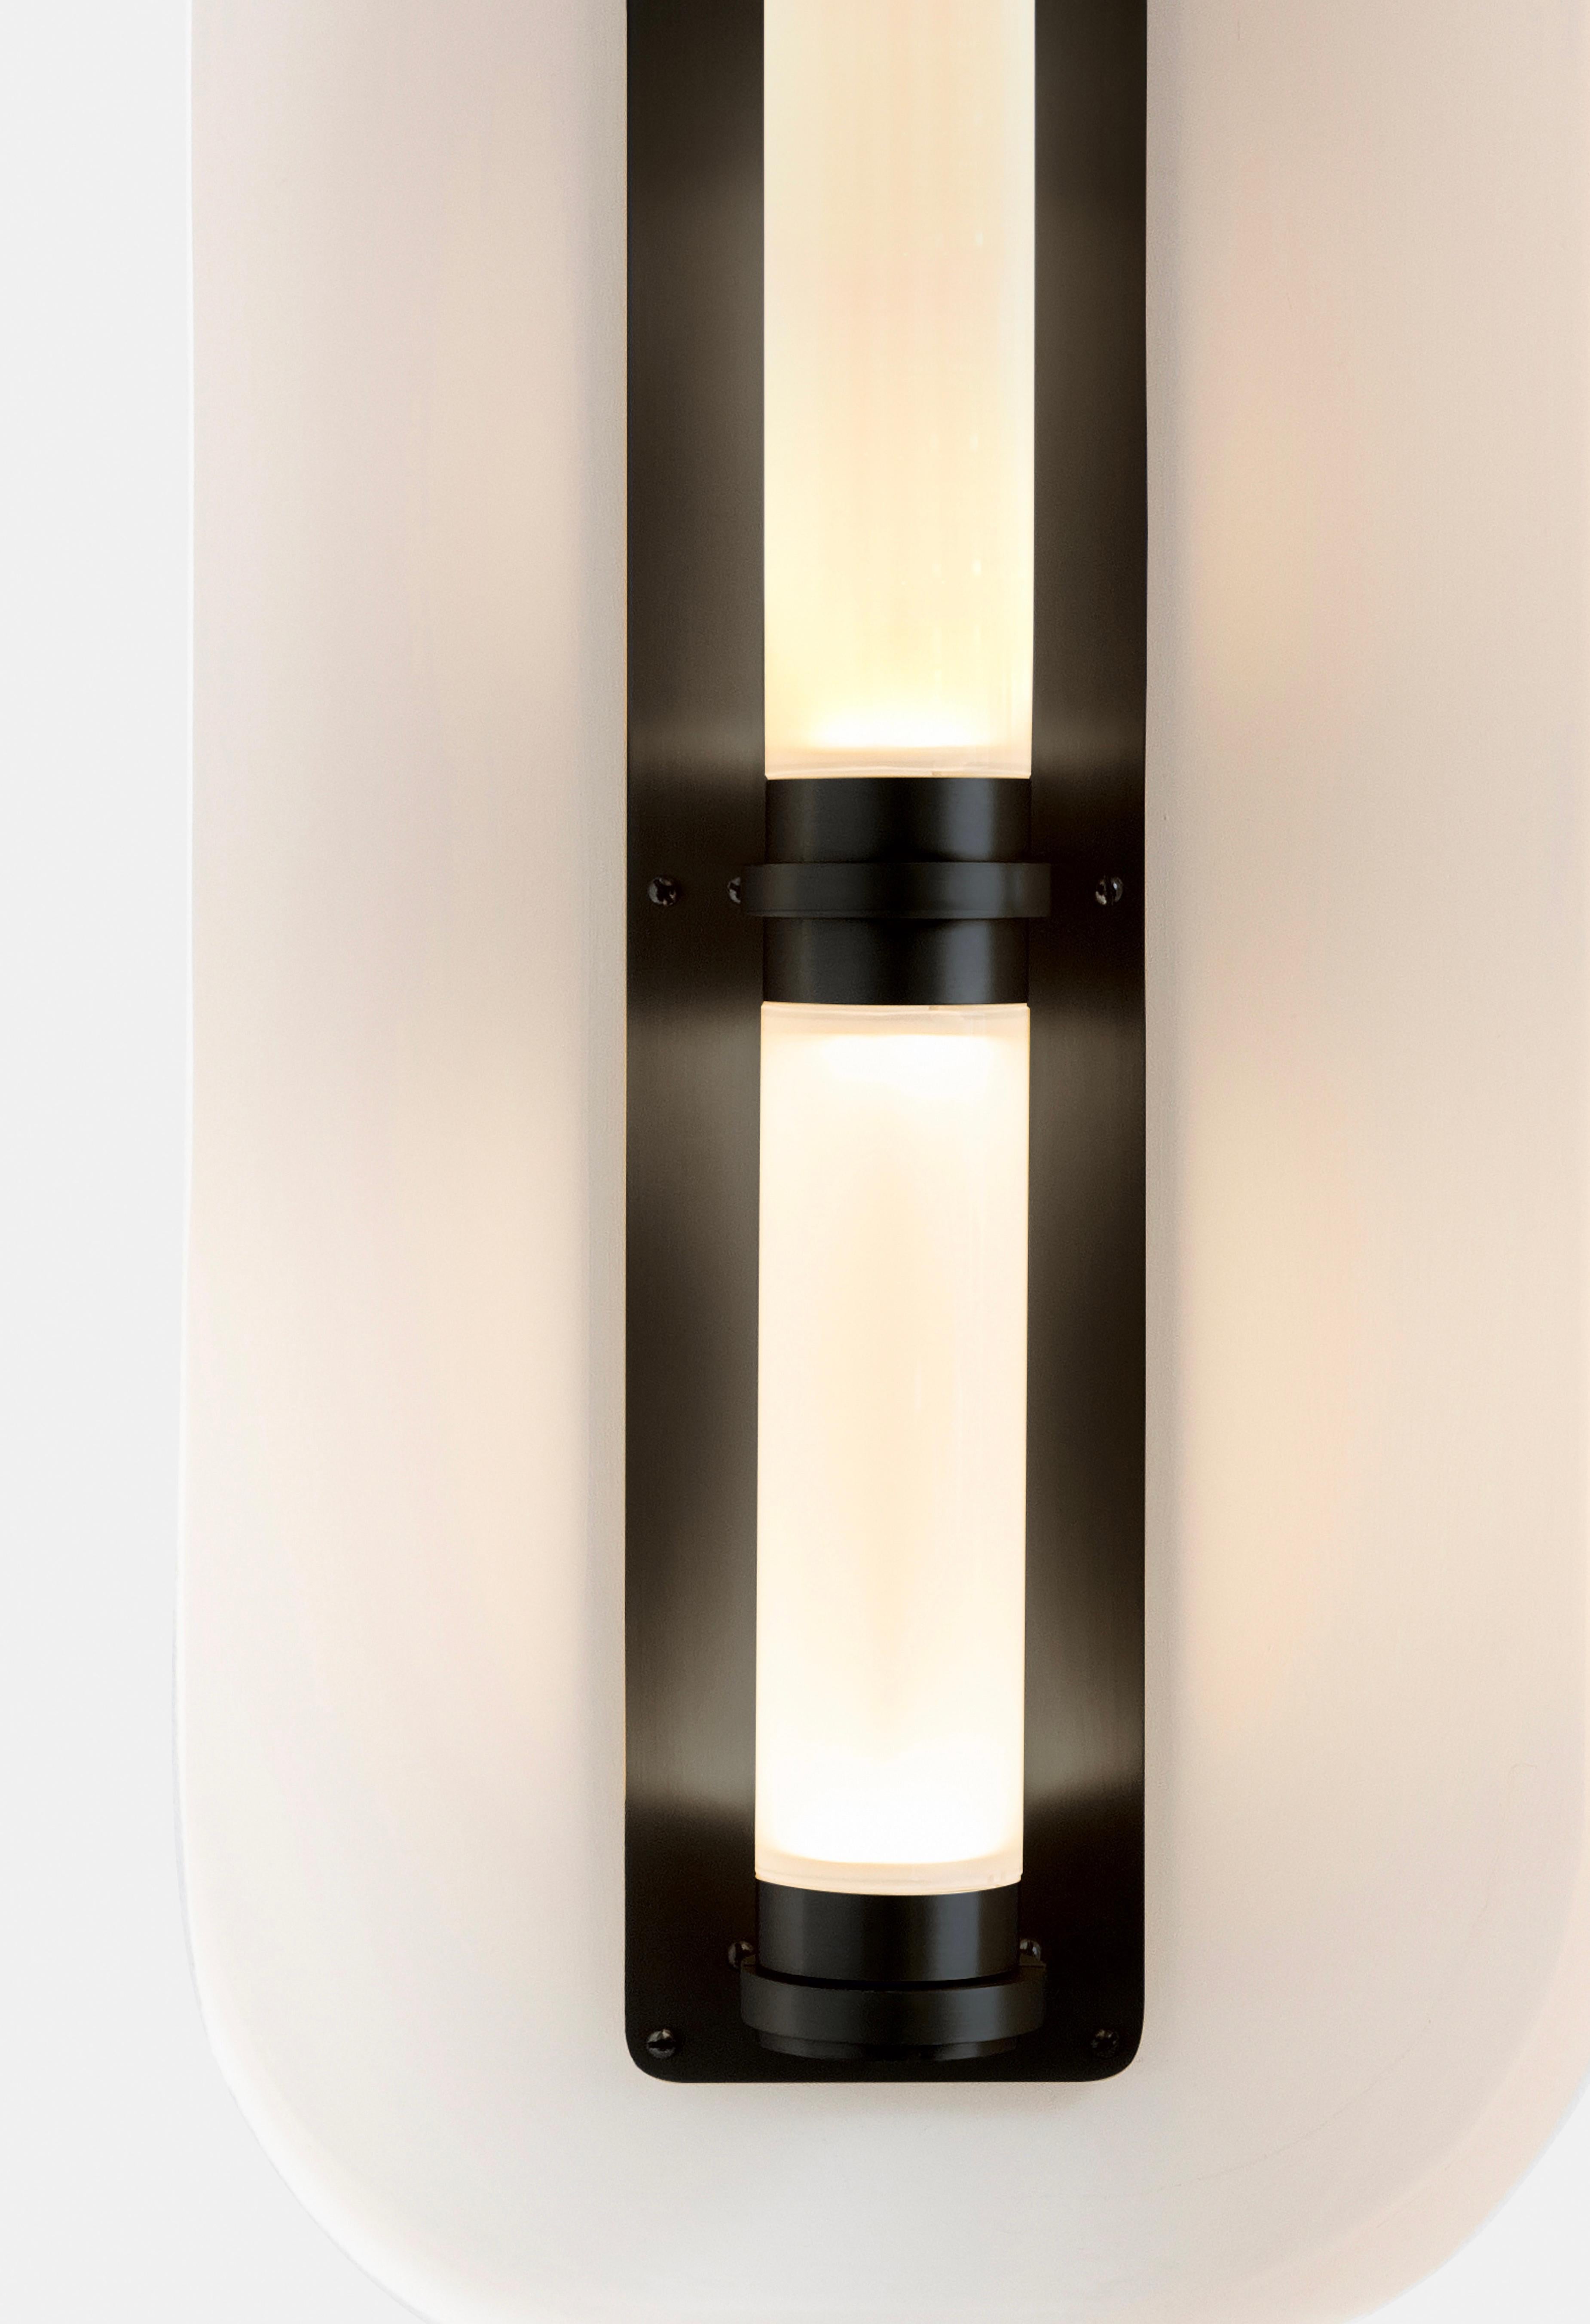 A lighting system with infinite interpretations, the Luna Sconce is an elegant and refined lighting option. Handmade with Gabriel Scott's signature metal and glass combination, this is one of the studio's most popular sconce options.